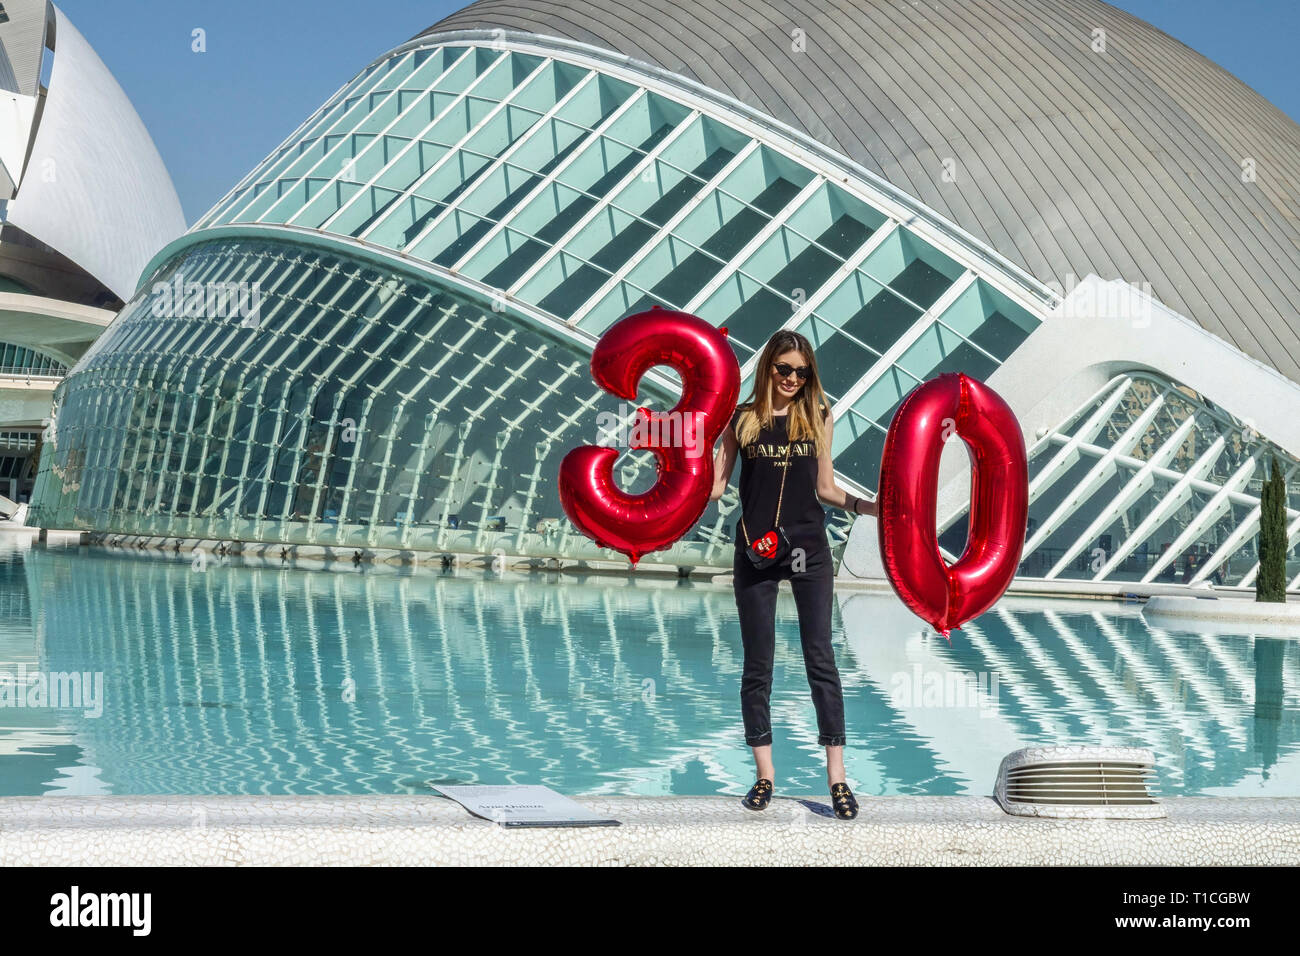 A woman who came to Valencia to celebrate her thirtieth - 30 birthday, City of Science Valencia Spain young thirties Stock Photo